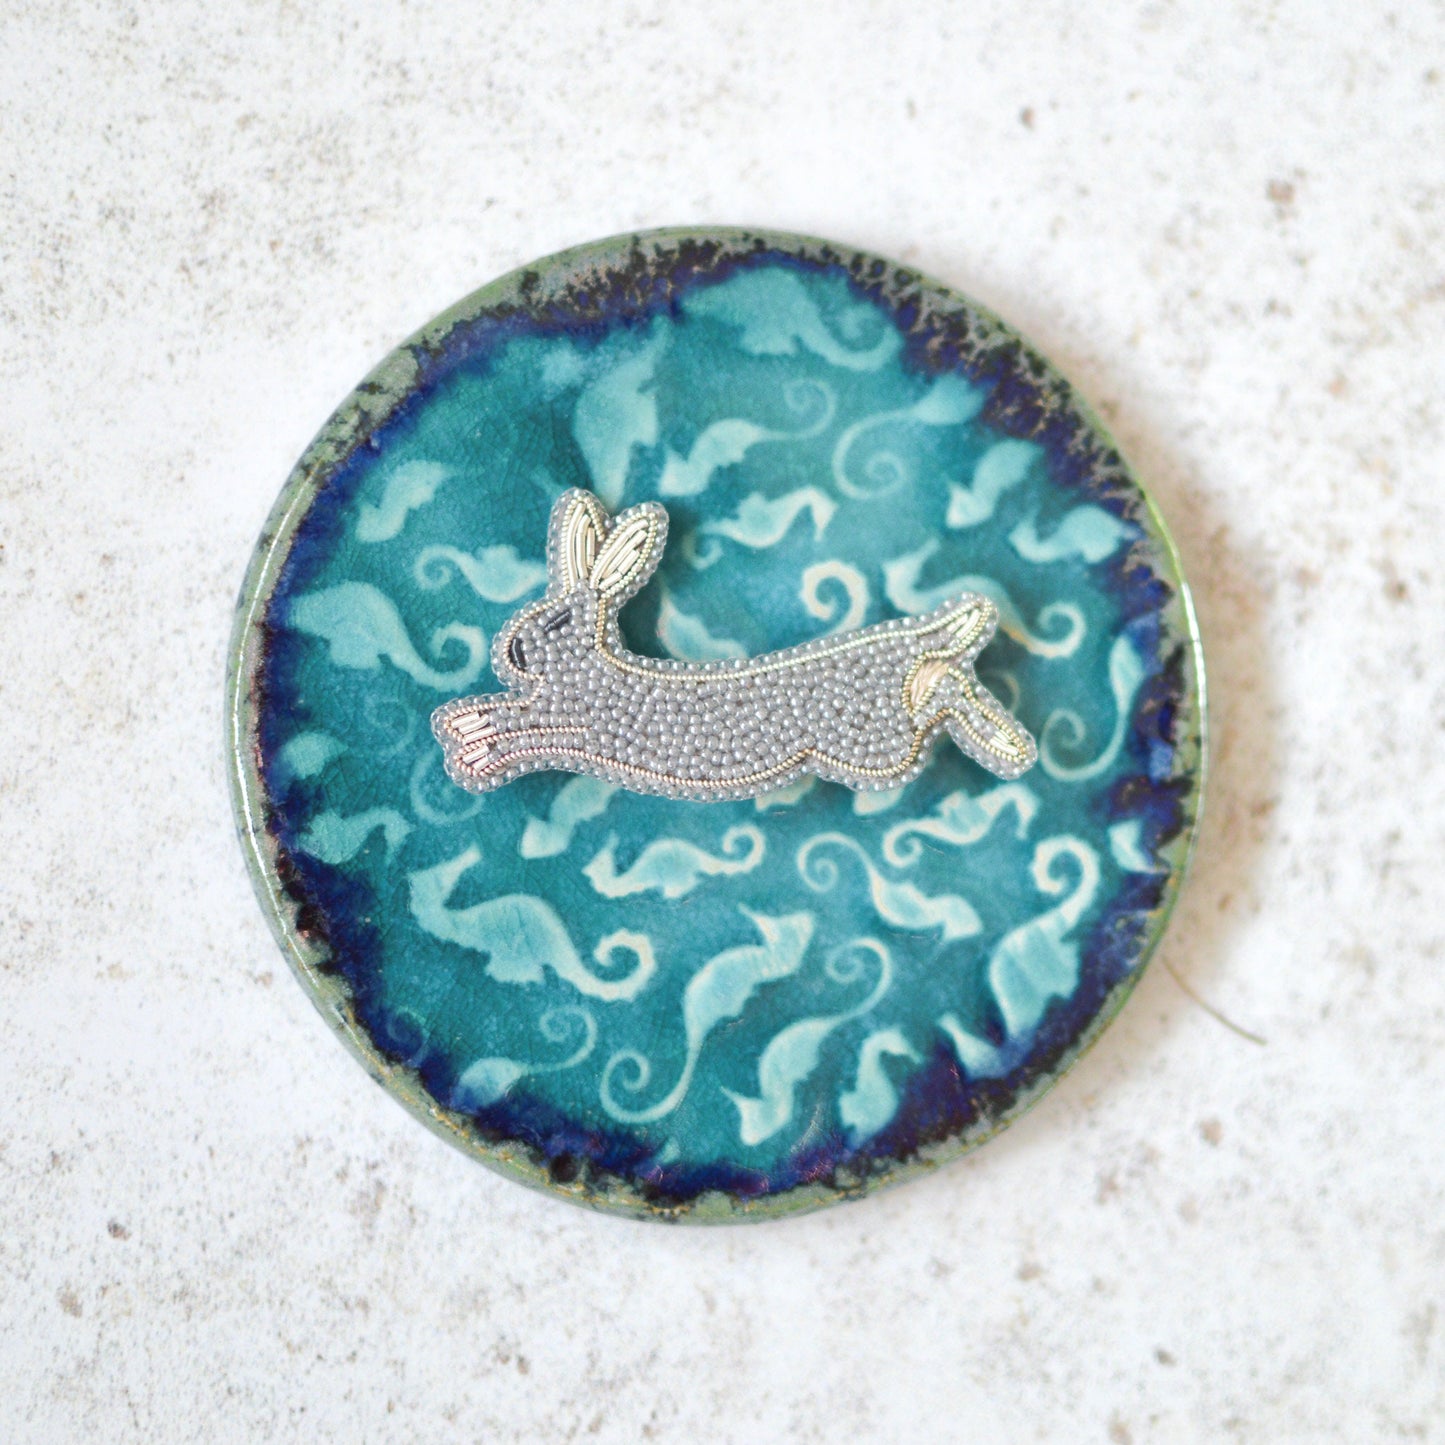 Leaping Hare Brooch